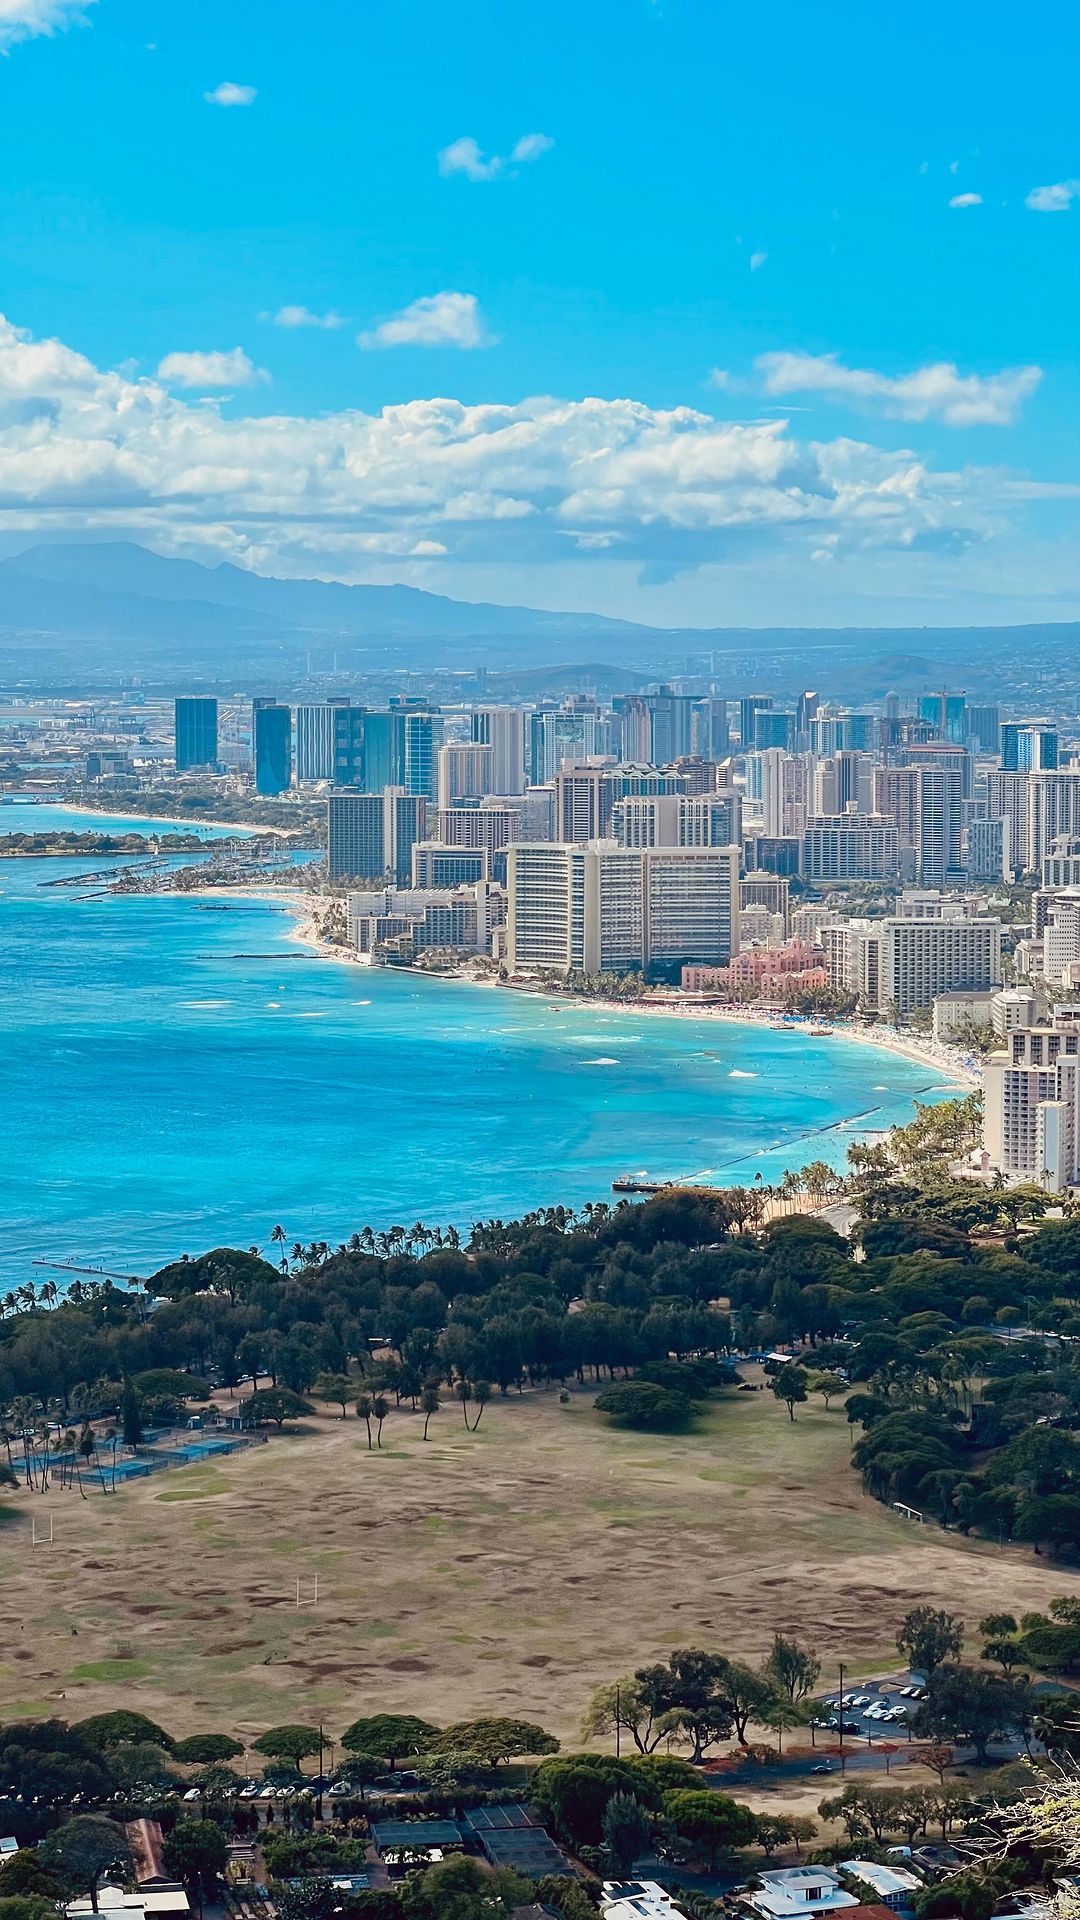 6-Day Honolulu LGBTQ+ Adventure with Iconic Sights and Culinary Delights